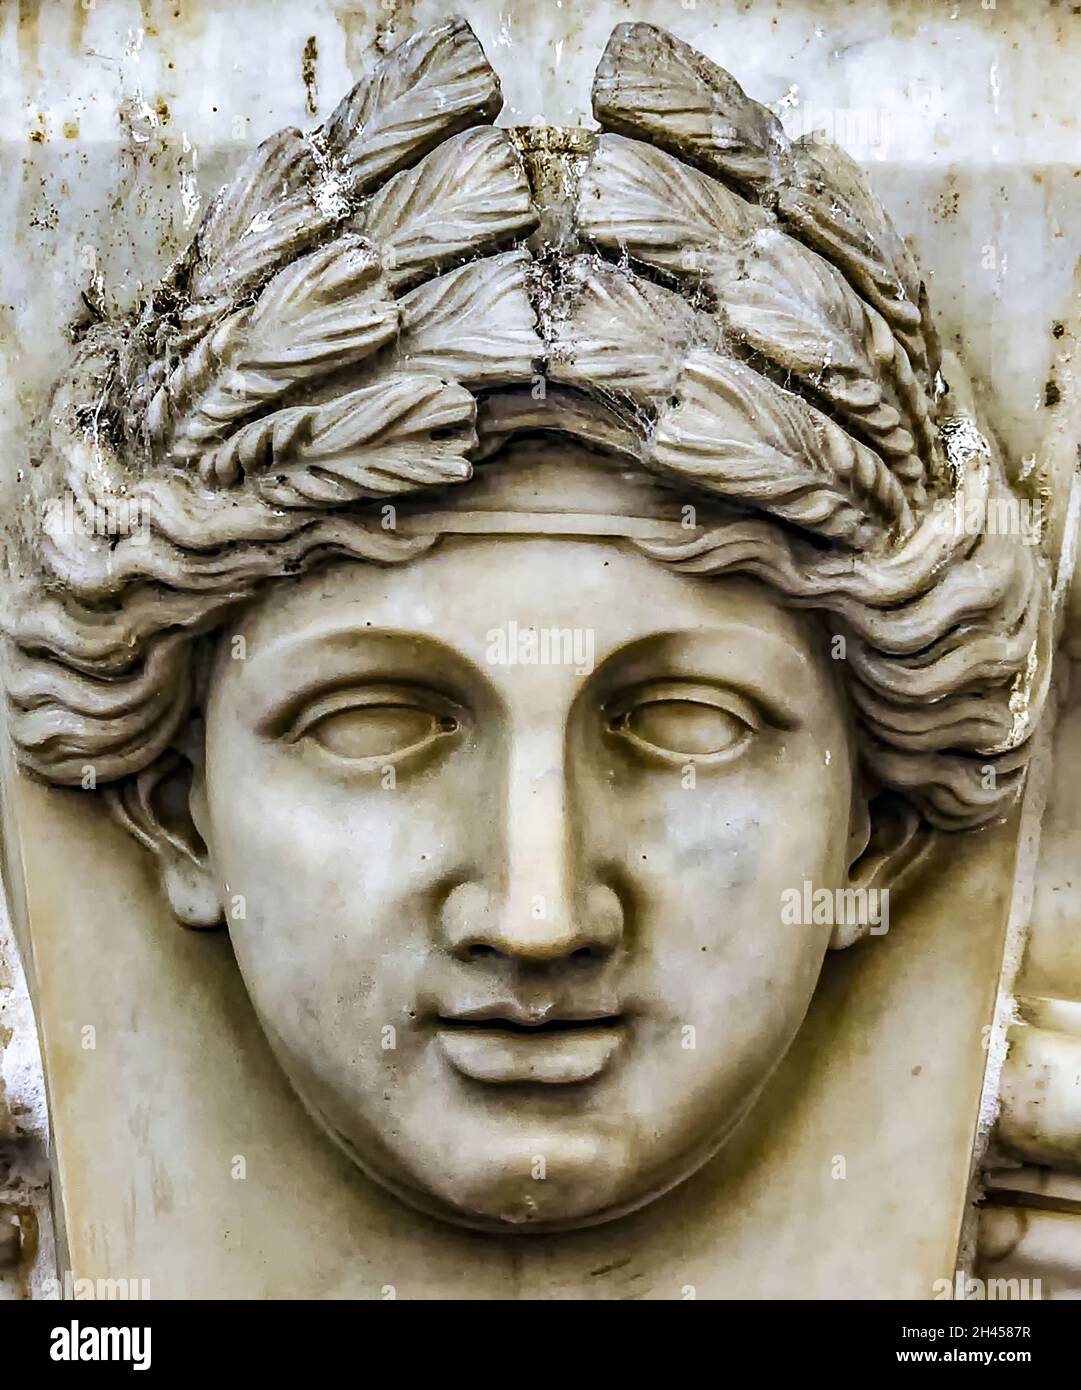 Ancient Roman sculpture, in which you can see a face Stock Photo